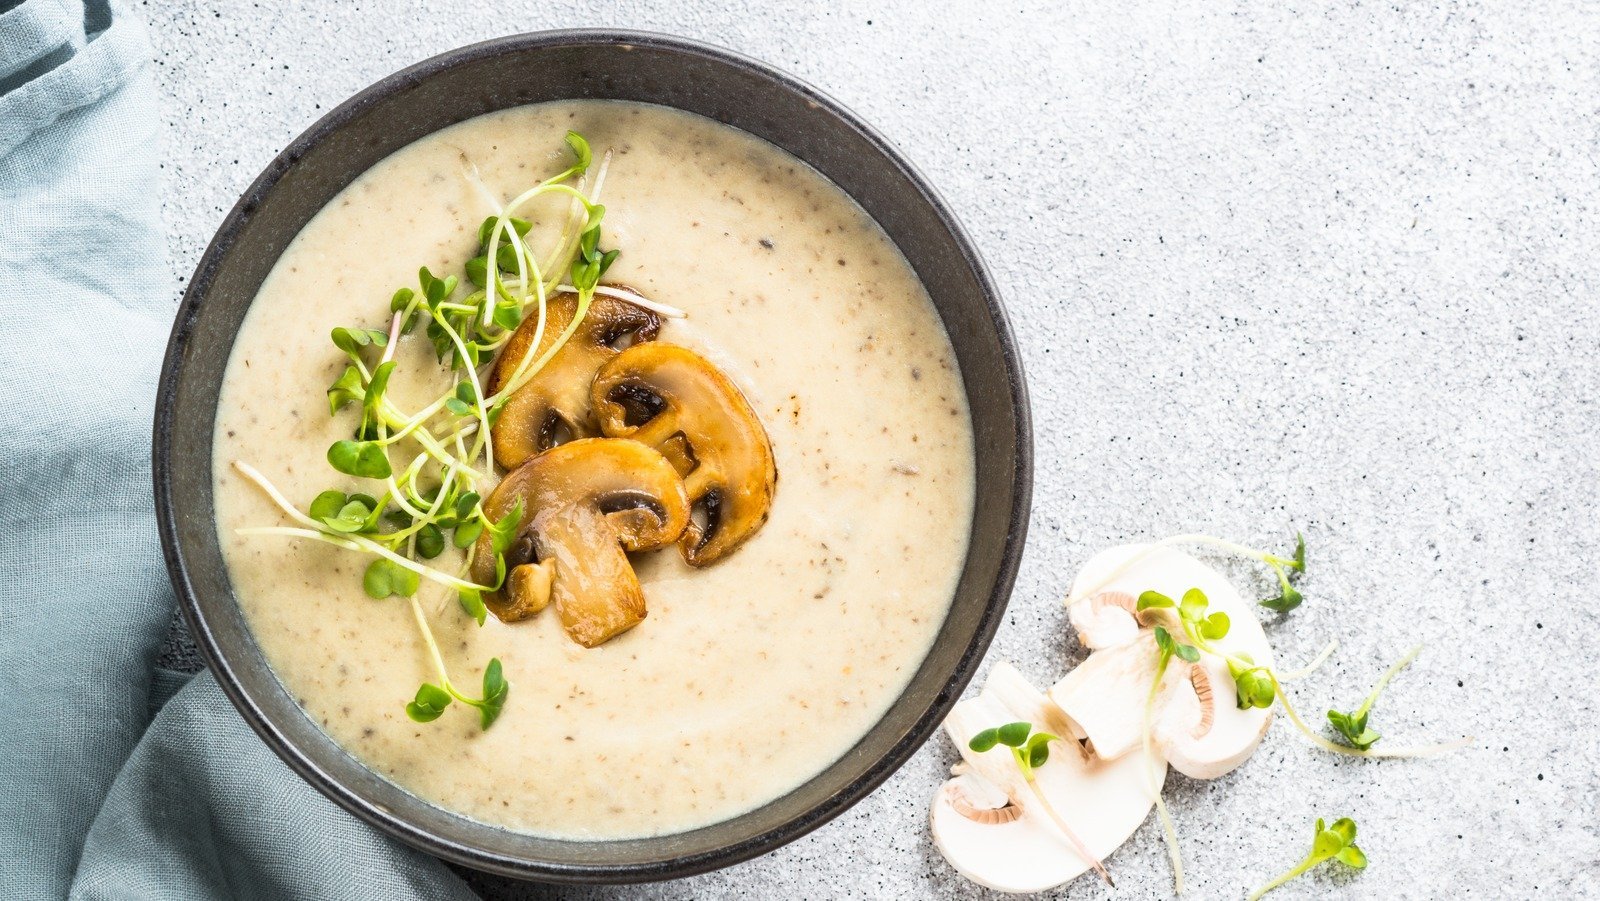 Canned Cream Of Mushroom Soups Ranked Worst To Best